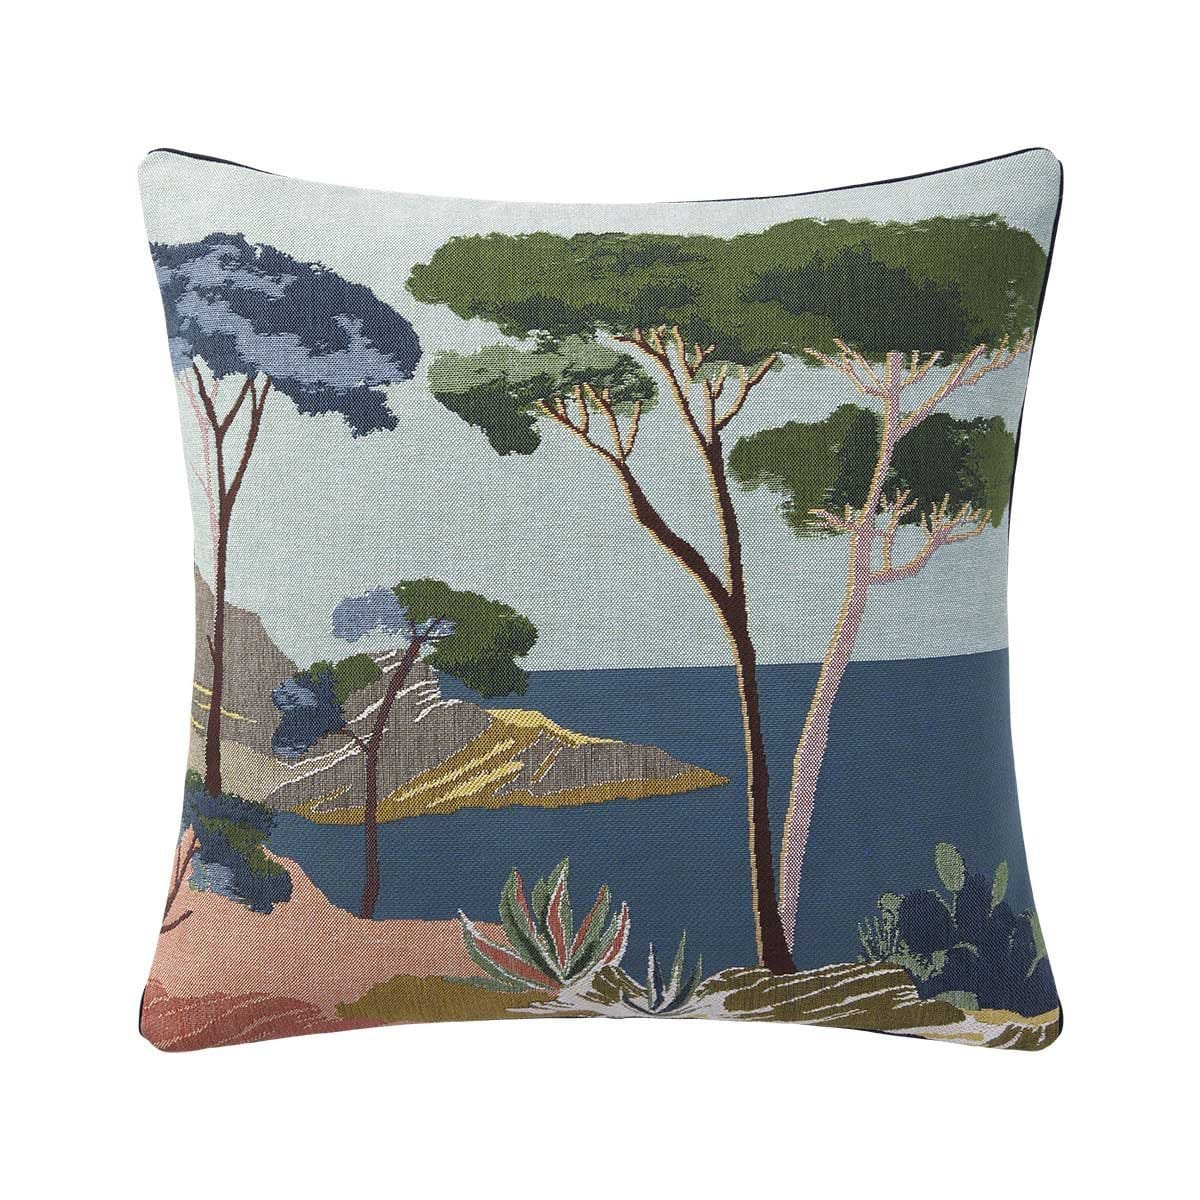 Decorative Pillows Iosis Cigales Decorative Pillow by Yves Delorme AzurP Yves Delorme